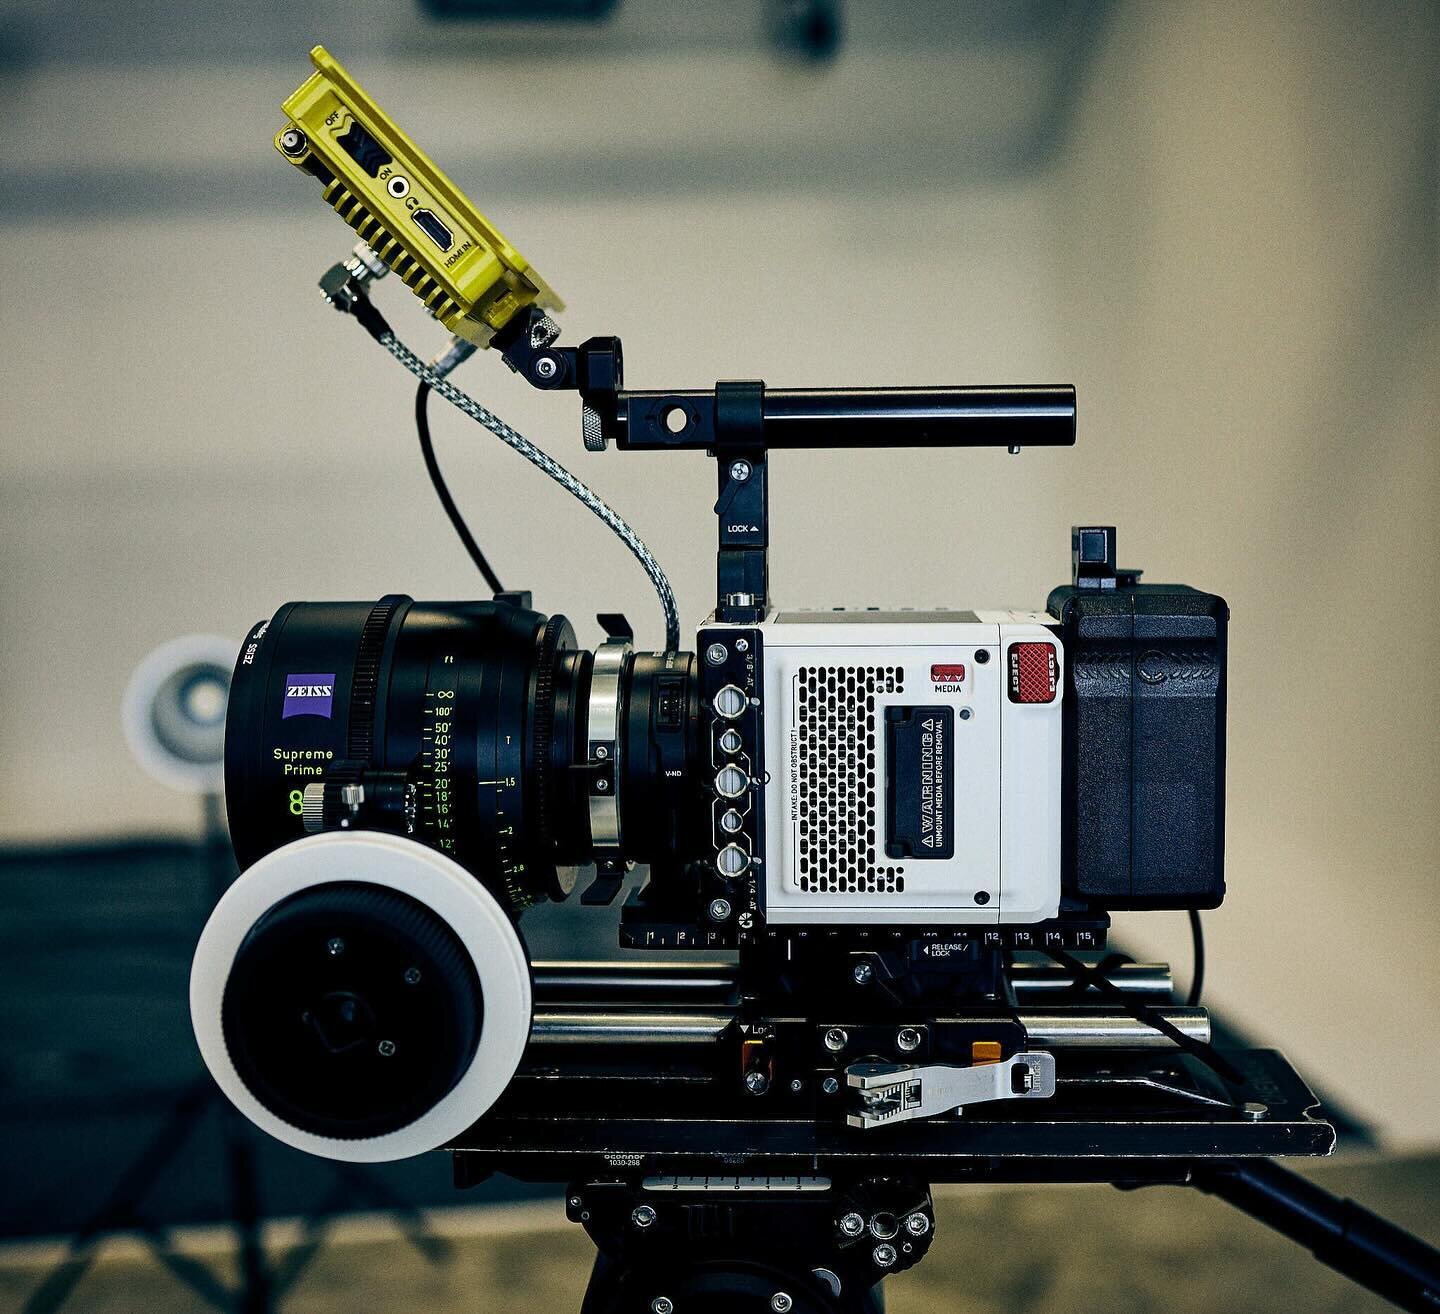 One of our Komodo-X with a Zeiss Supreme Prime.  Special yellow BM5 WR from @portkeys.global , rig by @brighttangerine , and powered by @coreswx 

#komodox #redkomodo #cinematography #filmmaking #filmmaker #zeisslens